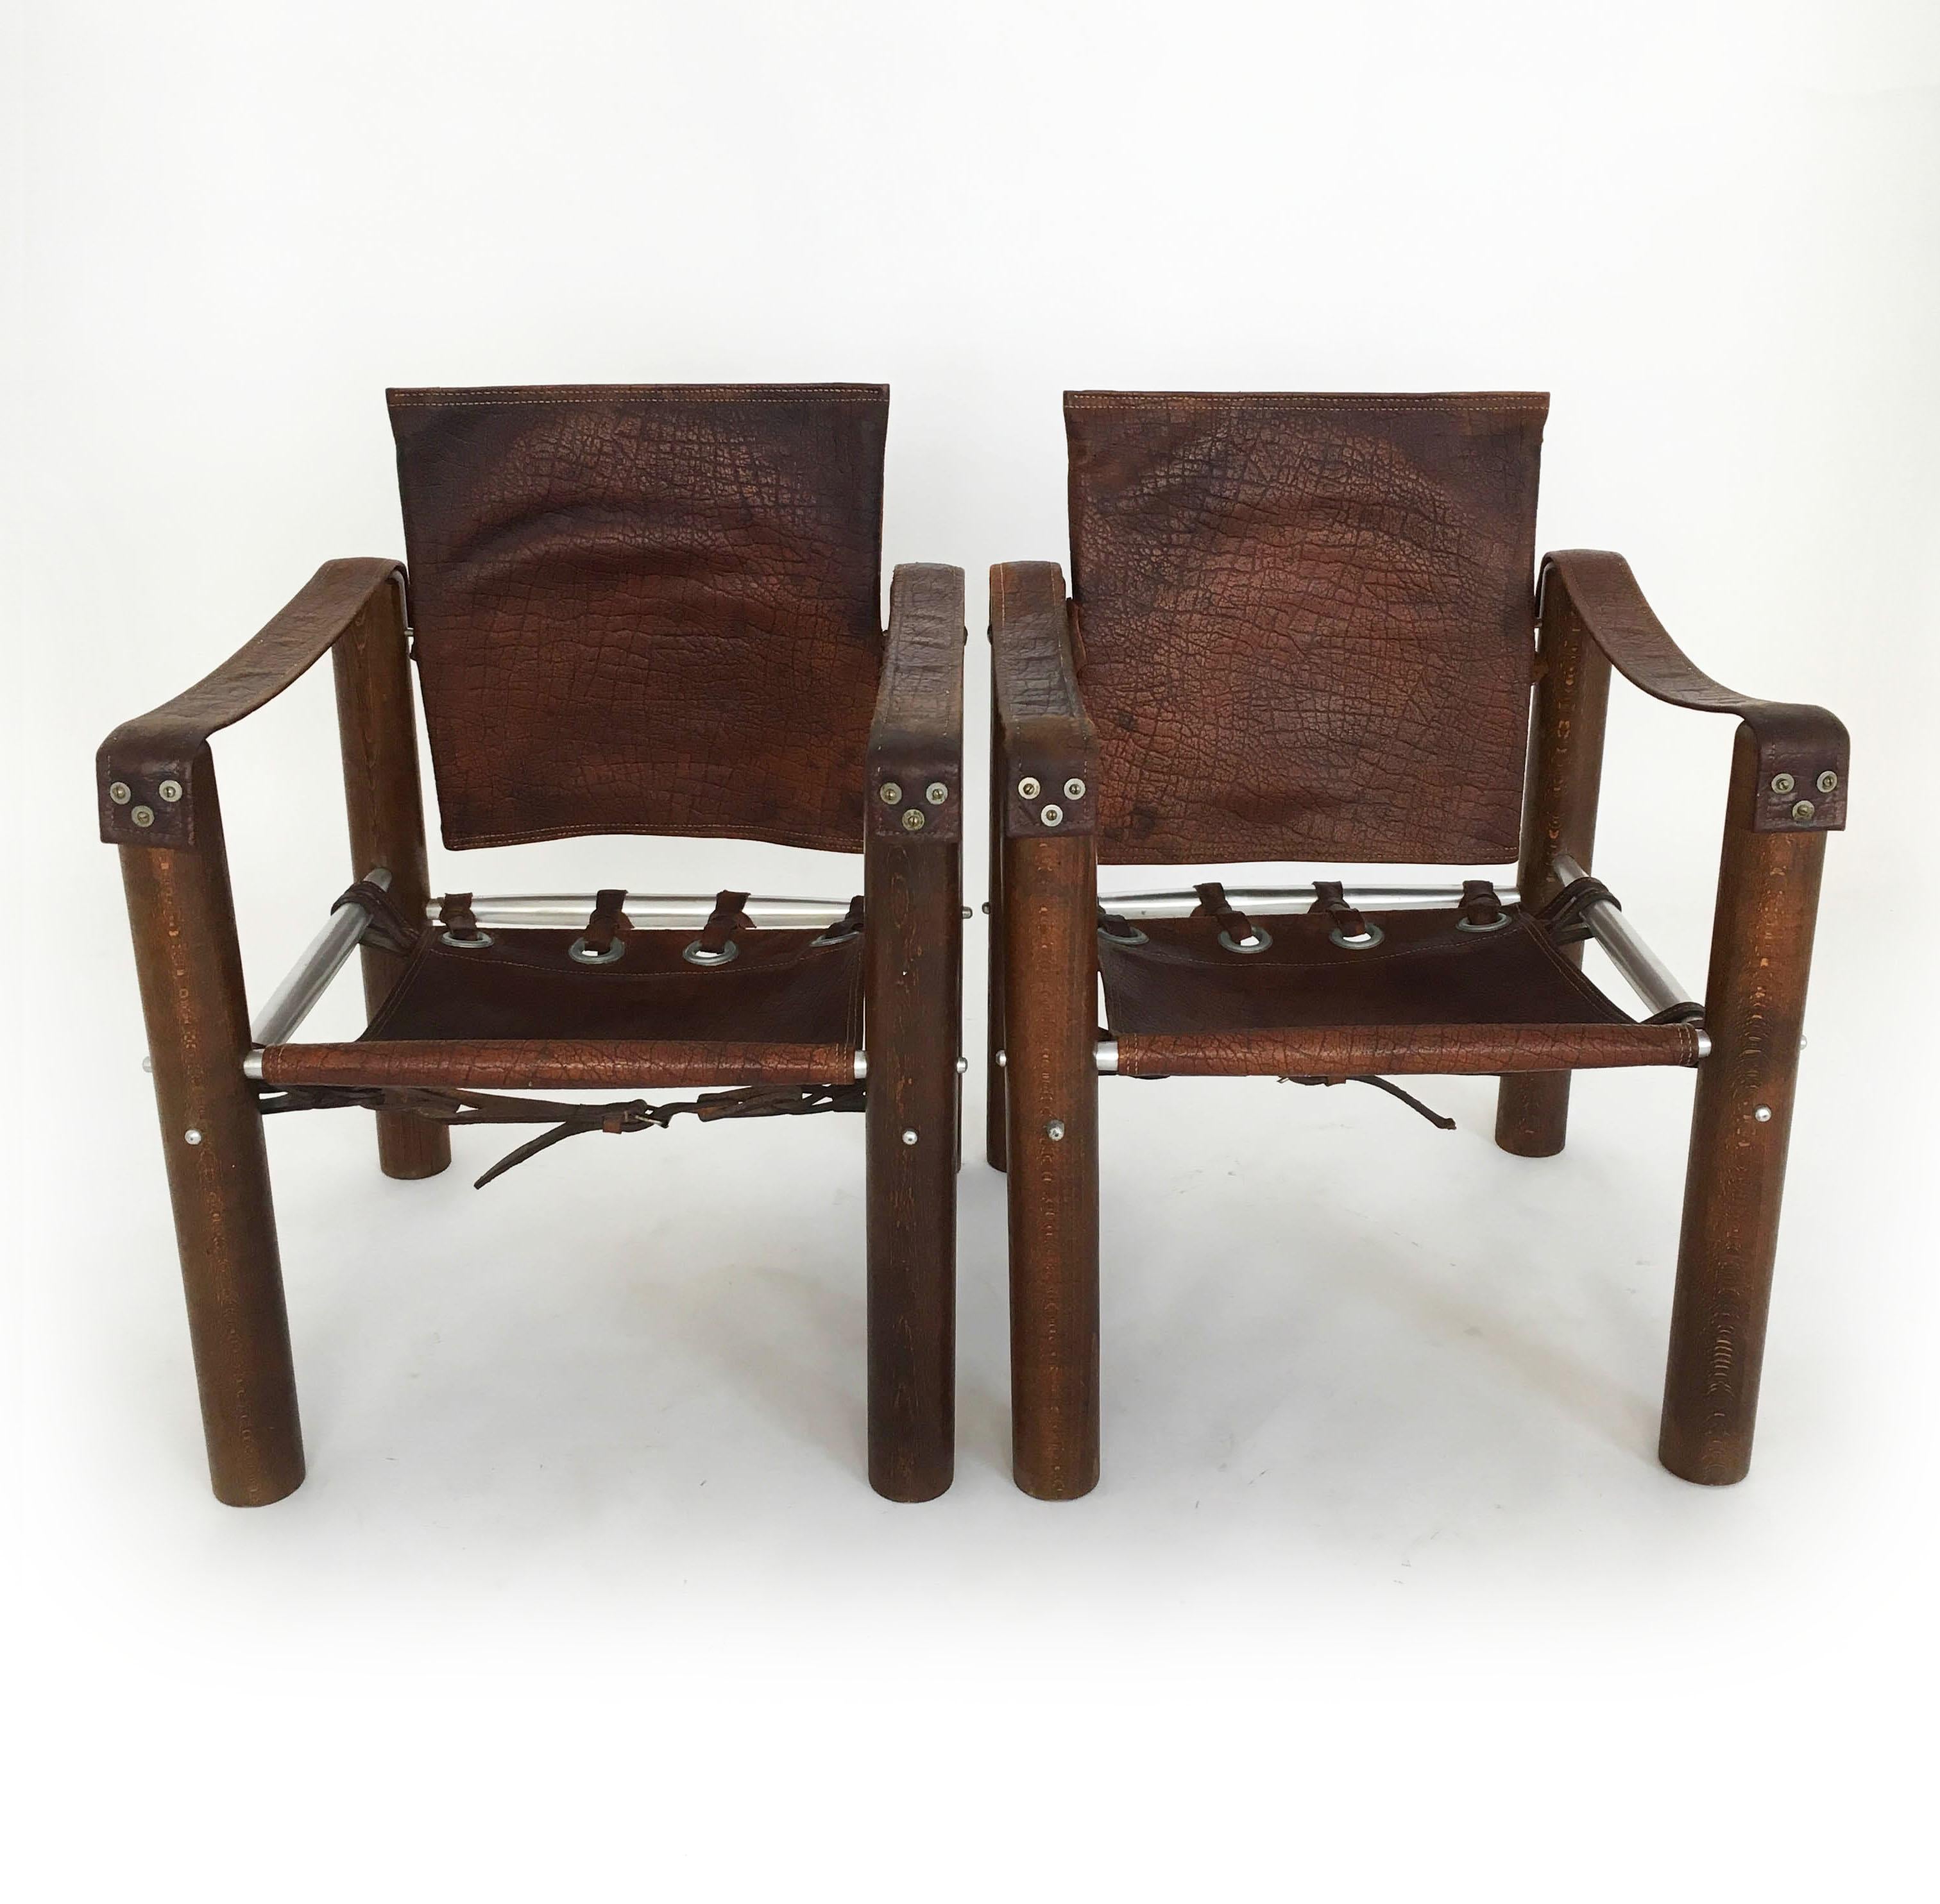 A pair modern safari chairs in patinated leather from Brazil 1970s.